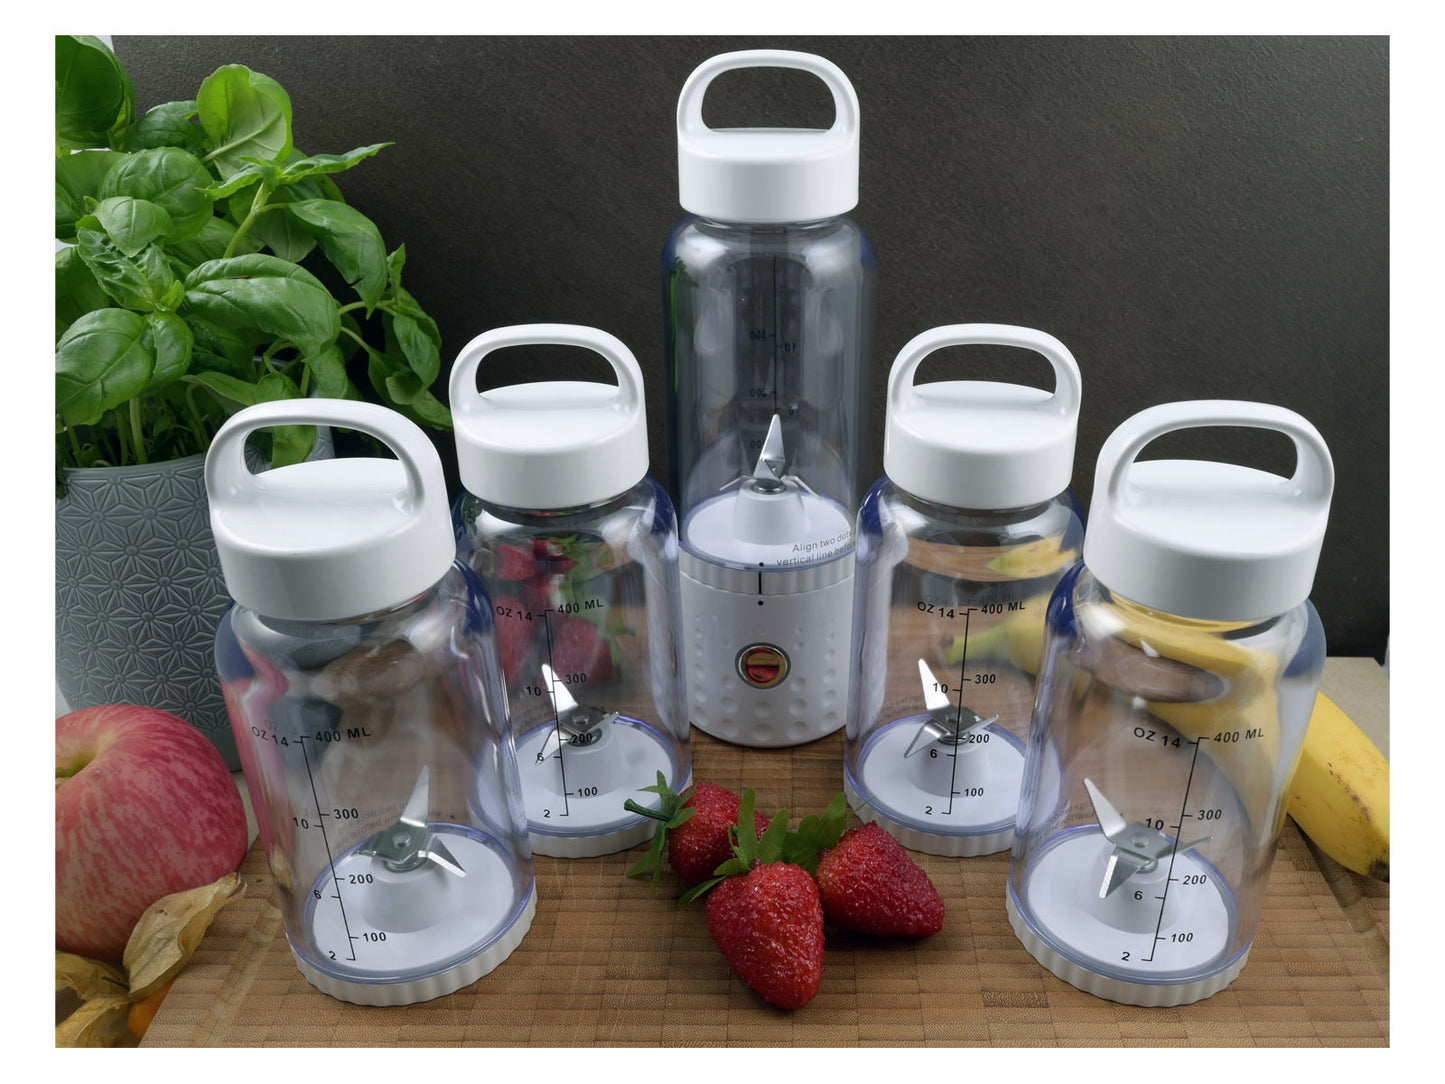 vitaliano portable Smoothie Maker to go in bundle with extra bottle, 500ml, USB, dishwasher-safe, lightweight mixer for freshness on the go - Bild 2